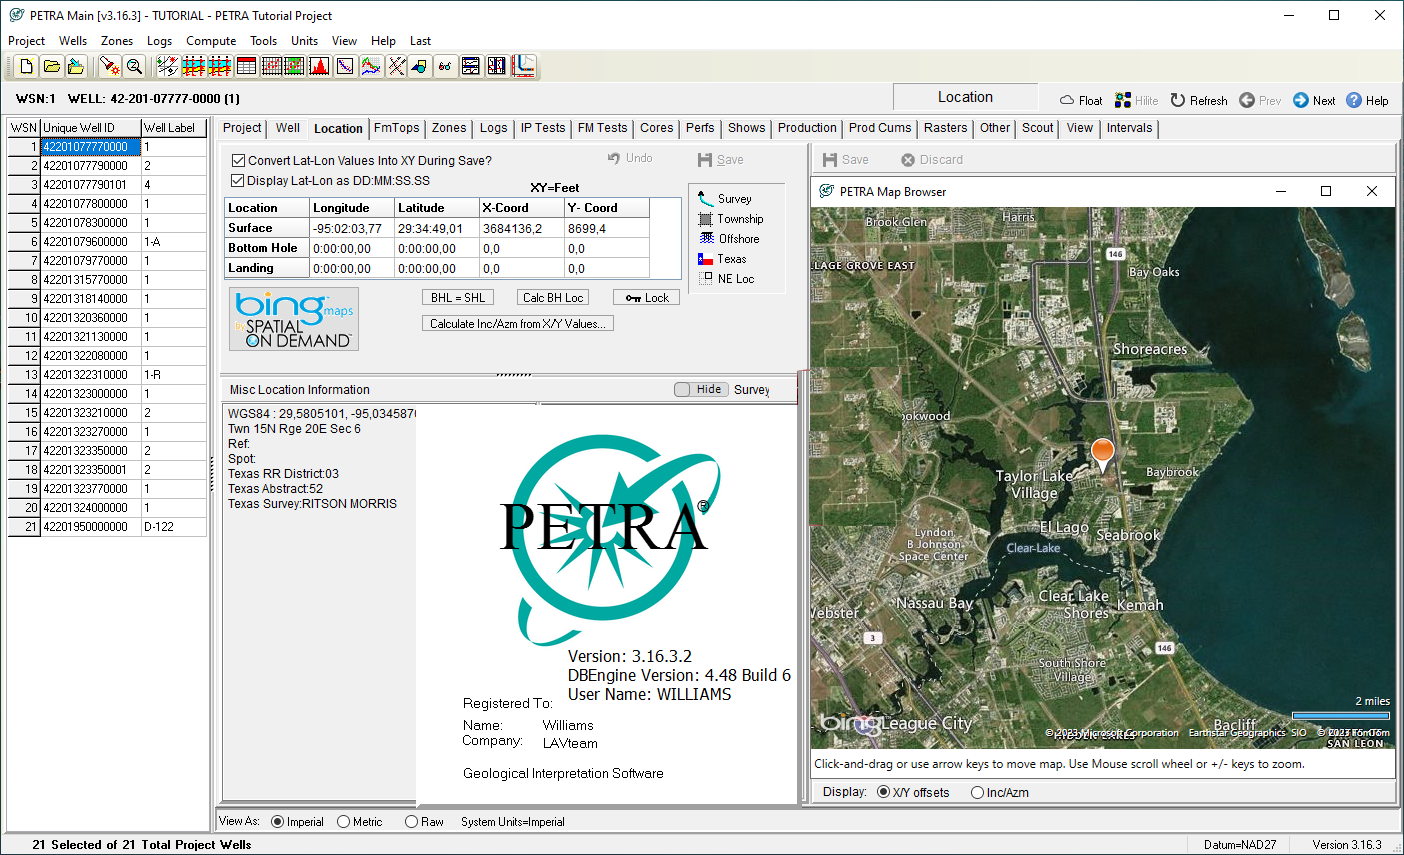 Working with IHS Markit Petra 2019 v3.16.3.2 full license